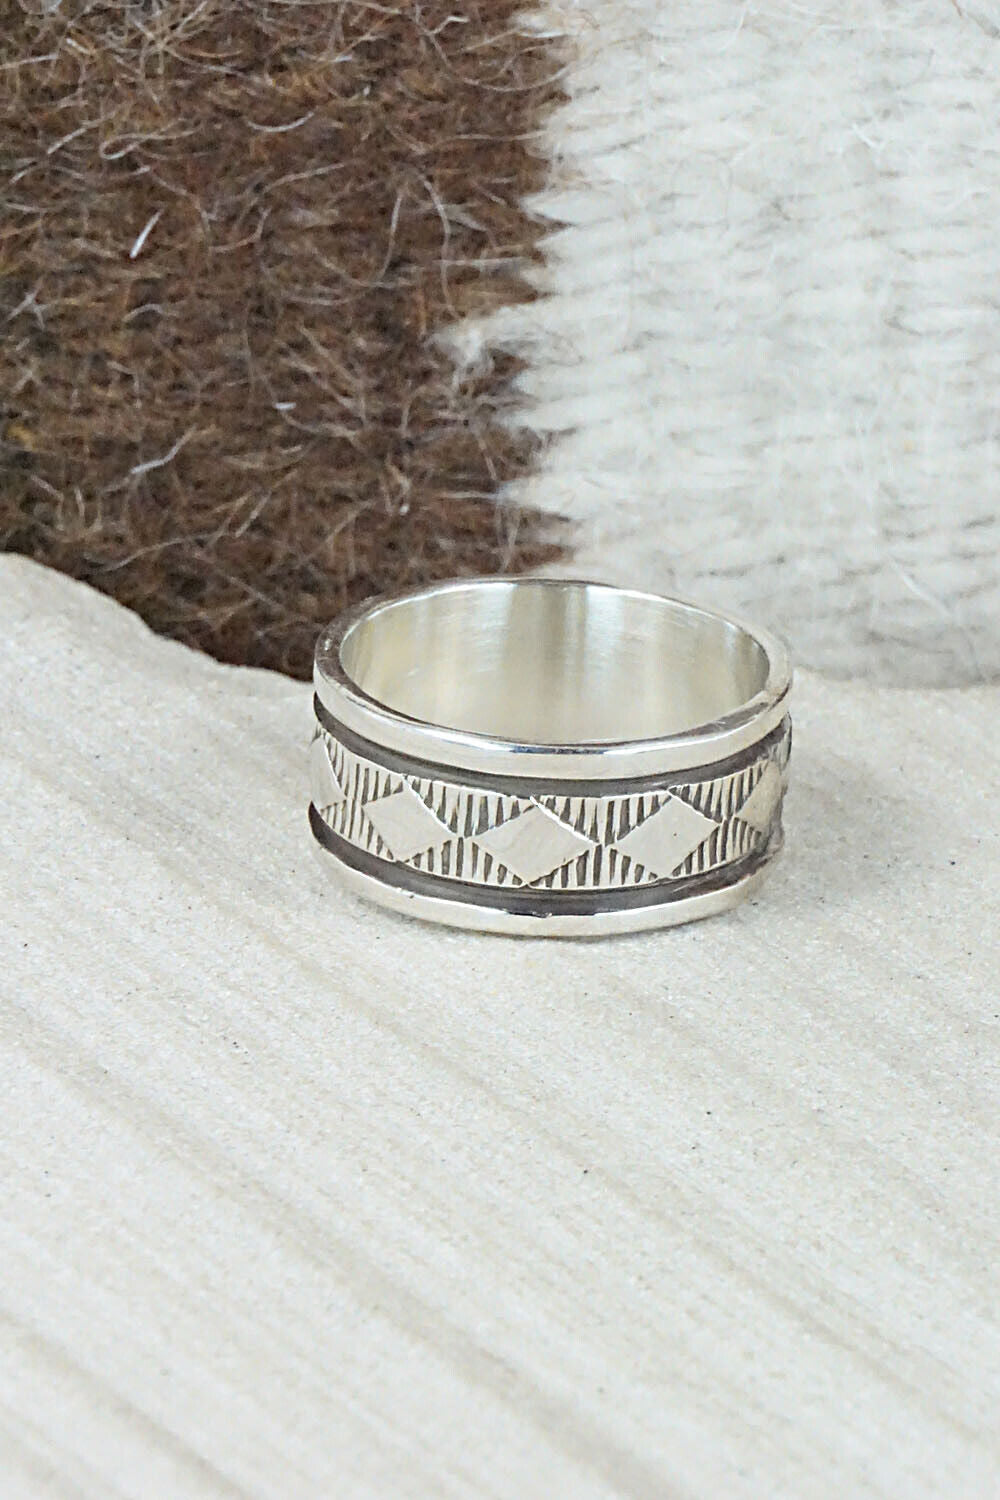 Sterling Silver Ring - Bruce Morgan - Size 10